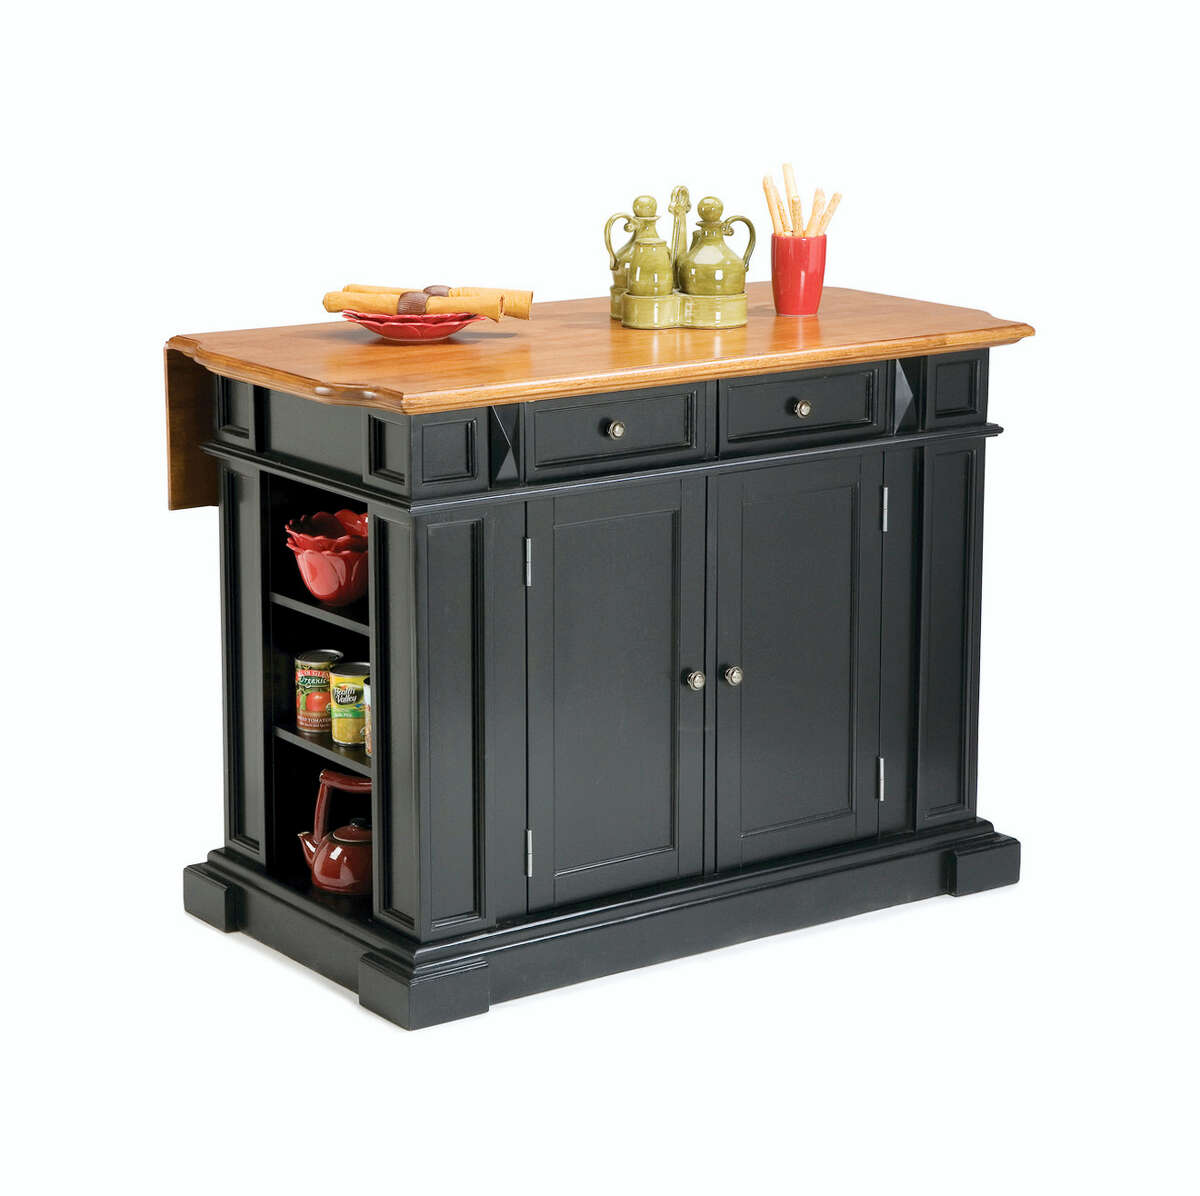 In this photo provided by Houzz.com, a transitional kitchen island or cart in black would be a smart way to introduce the color without committing to more permanent elements like cabinetry. This one from Houzz combines on-trend distressed wood with black.